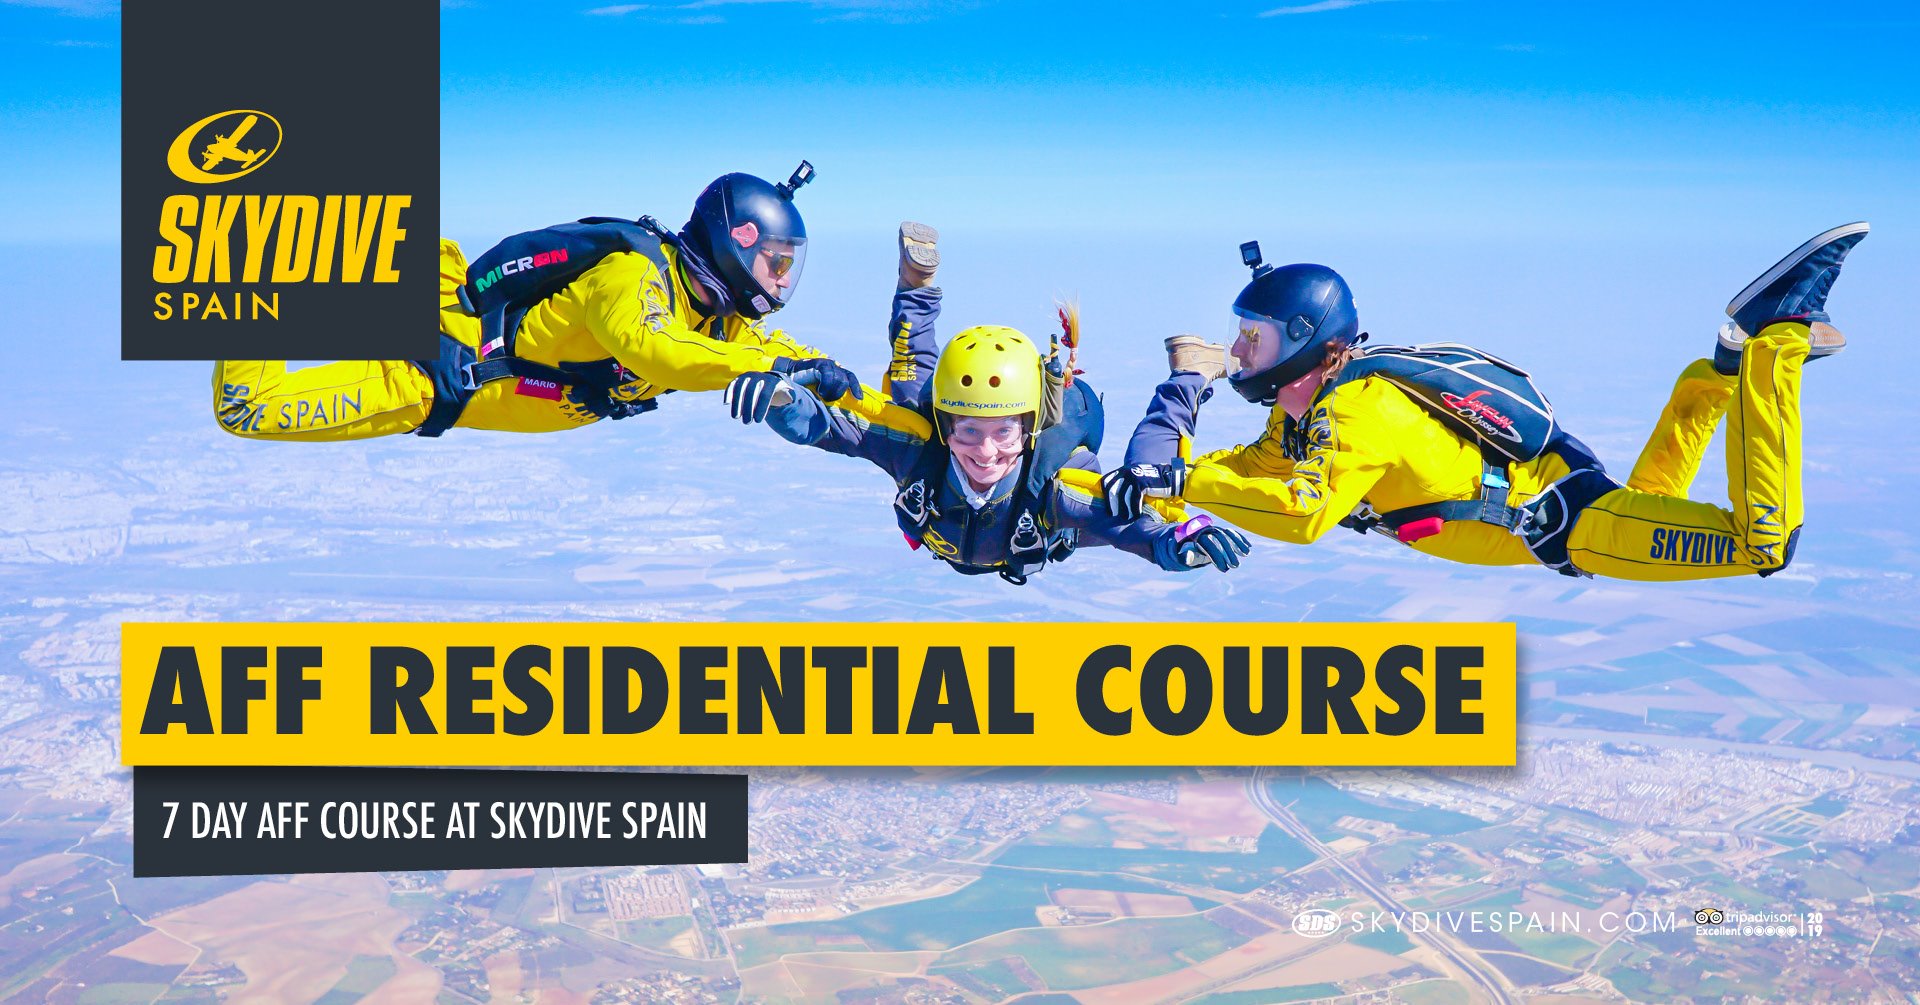 AFF RESIDENTIAL COURSE